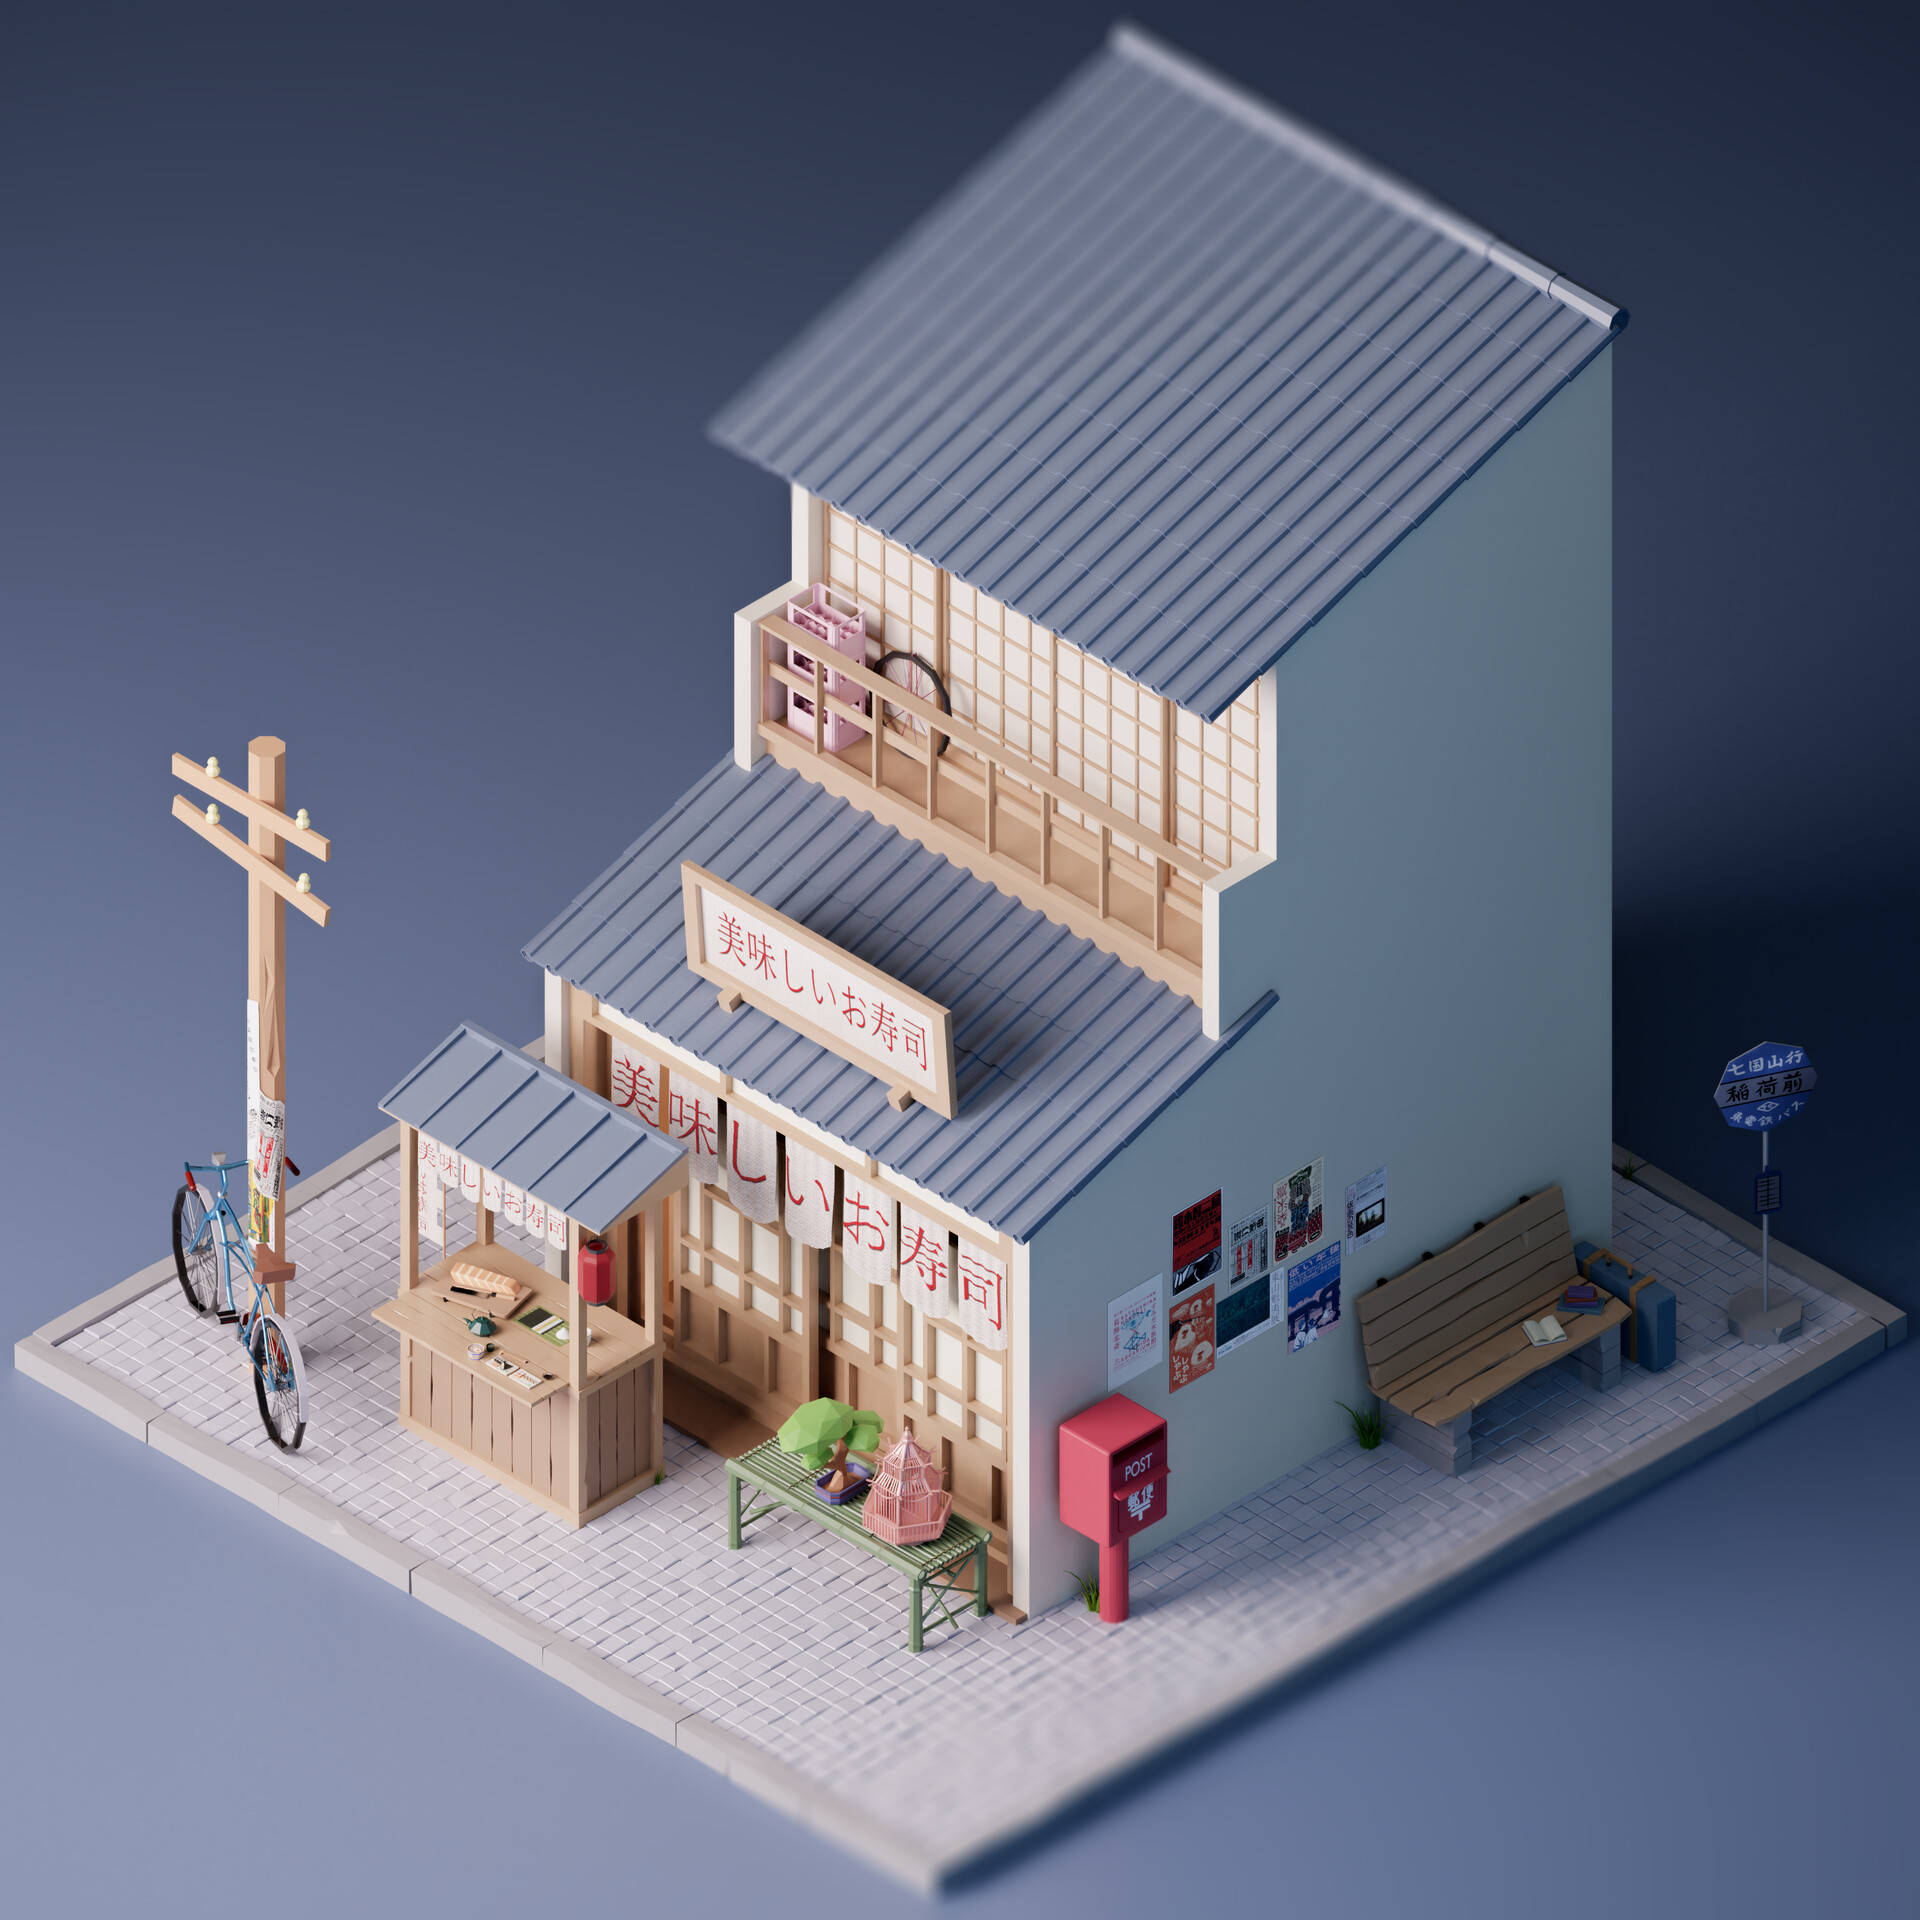 Caption: Miniature Japanese Sushi Set in a Dollhouse Wallpaper